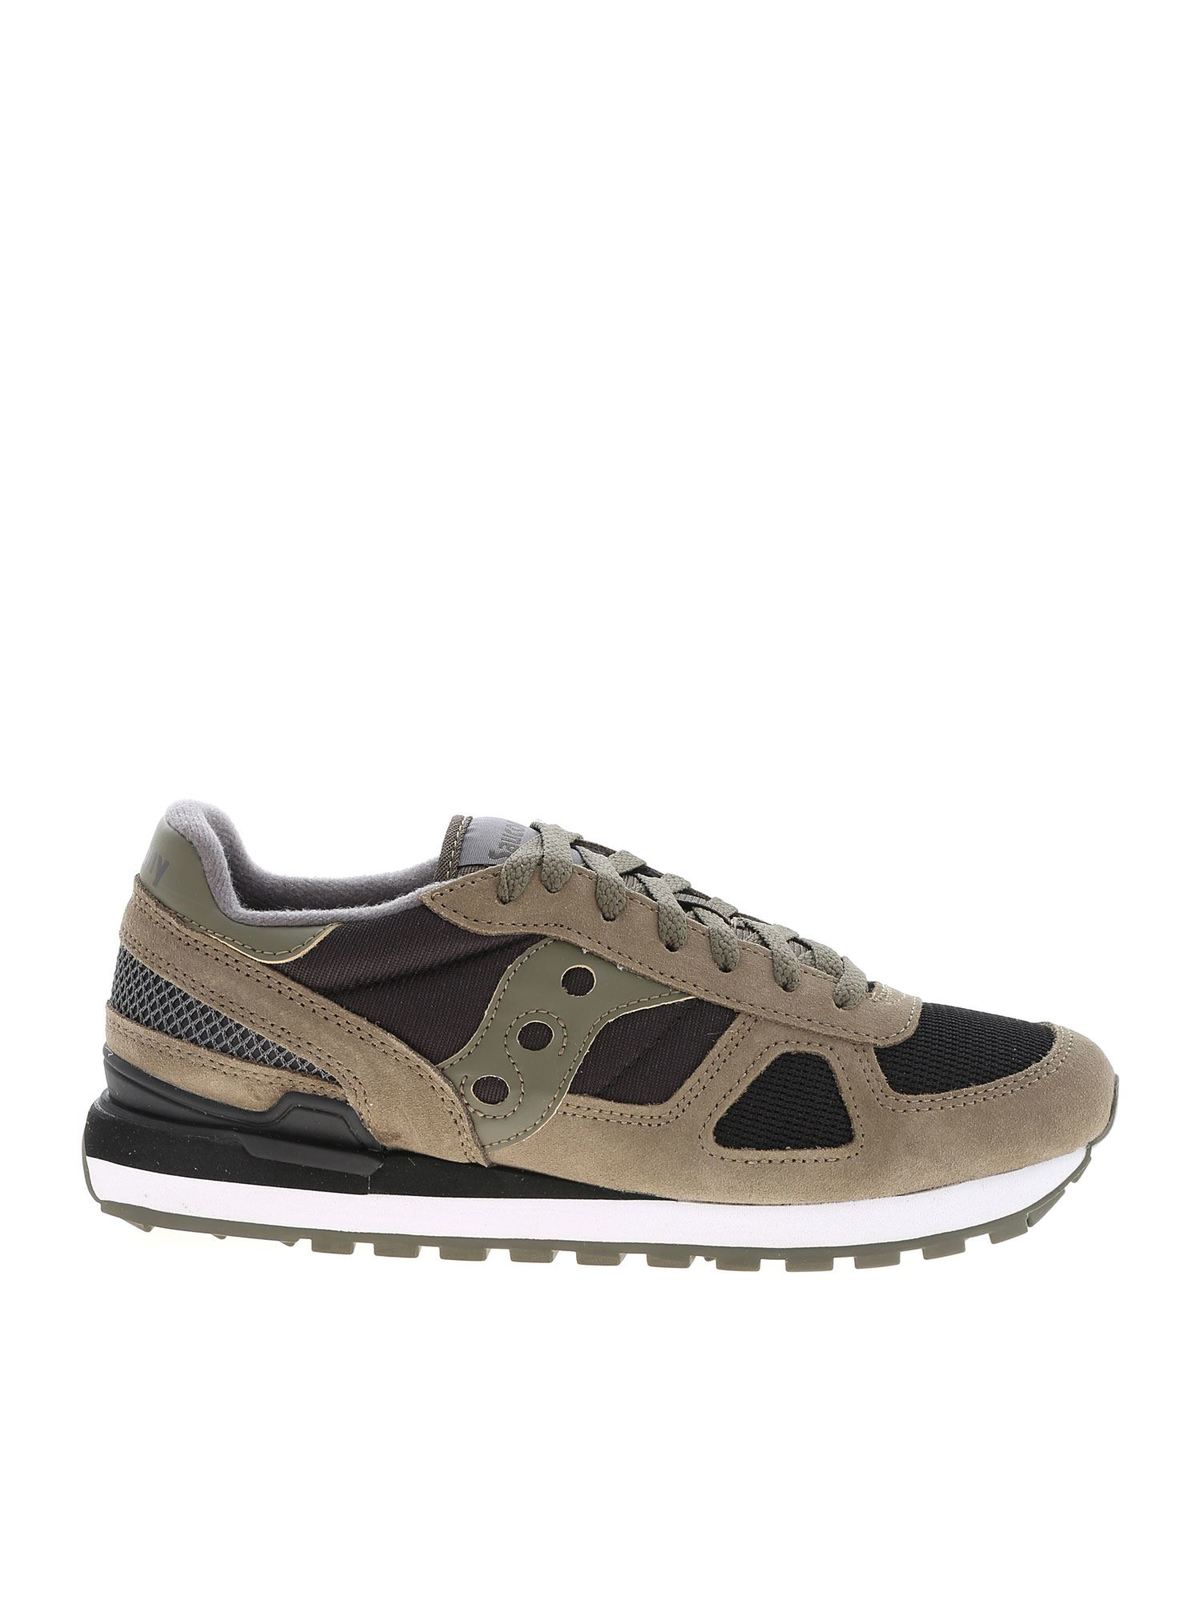 Saucony - Olive green and black Shadow O' sneakers - trainers - 2108655